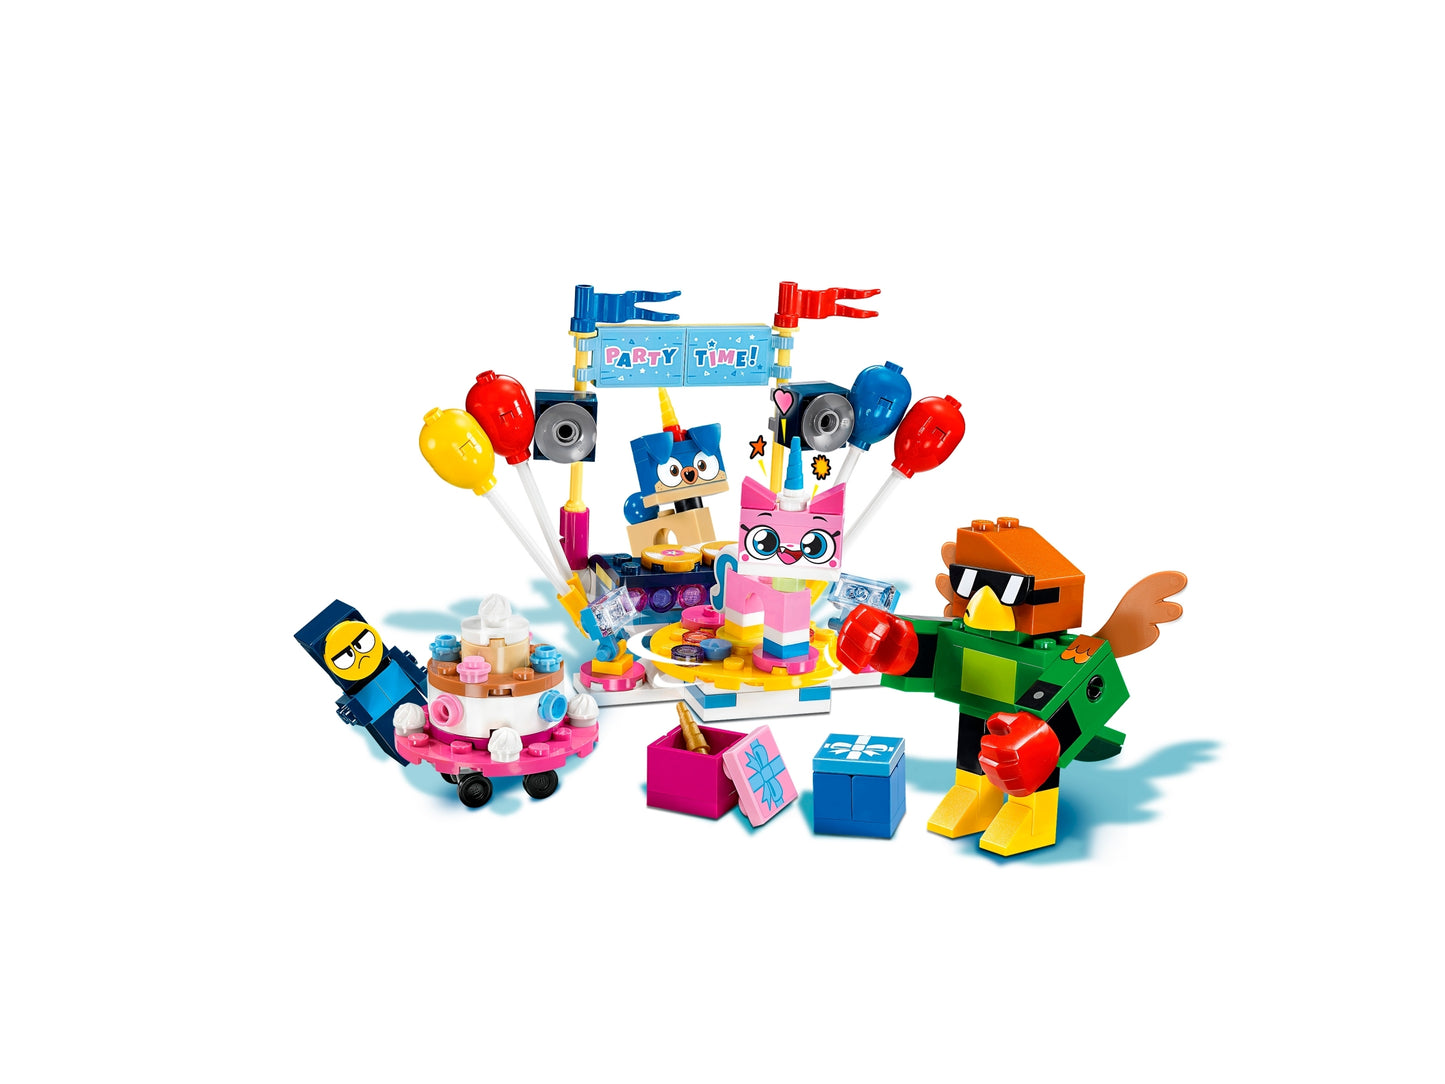 Lego - Unkitty, Party Time